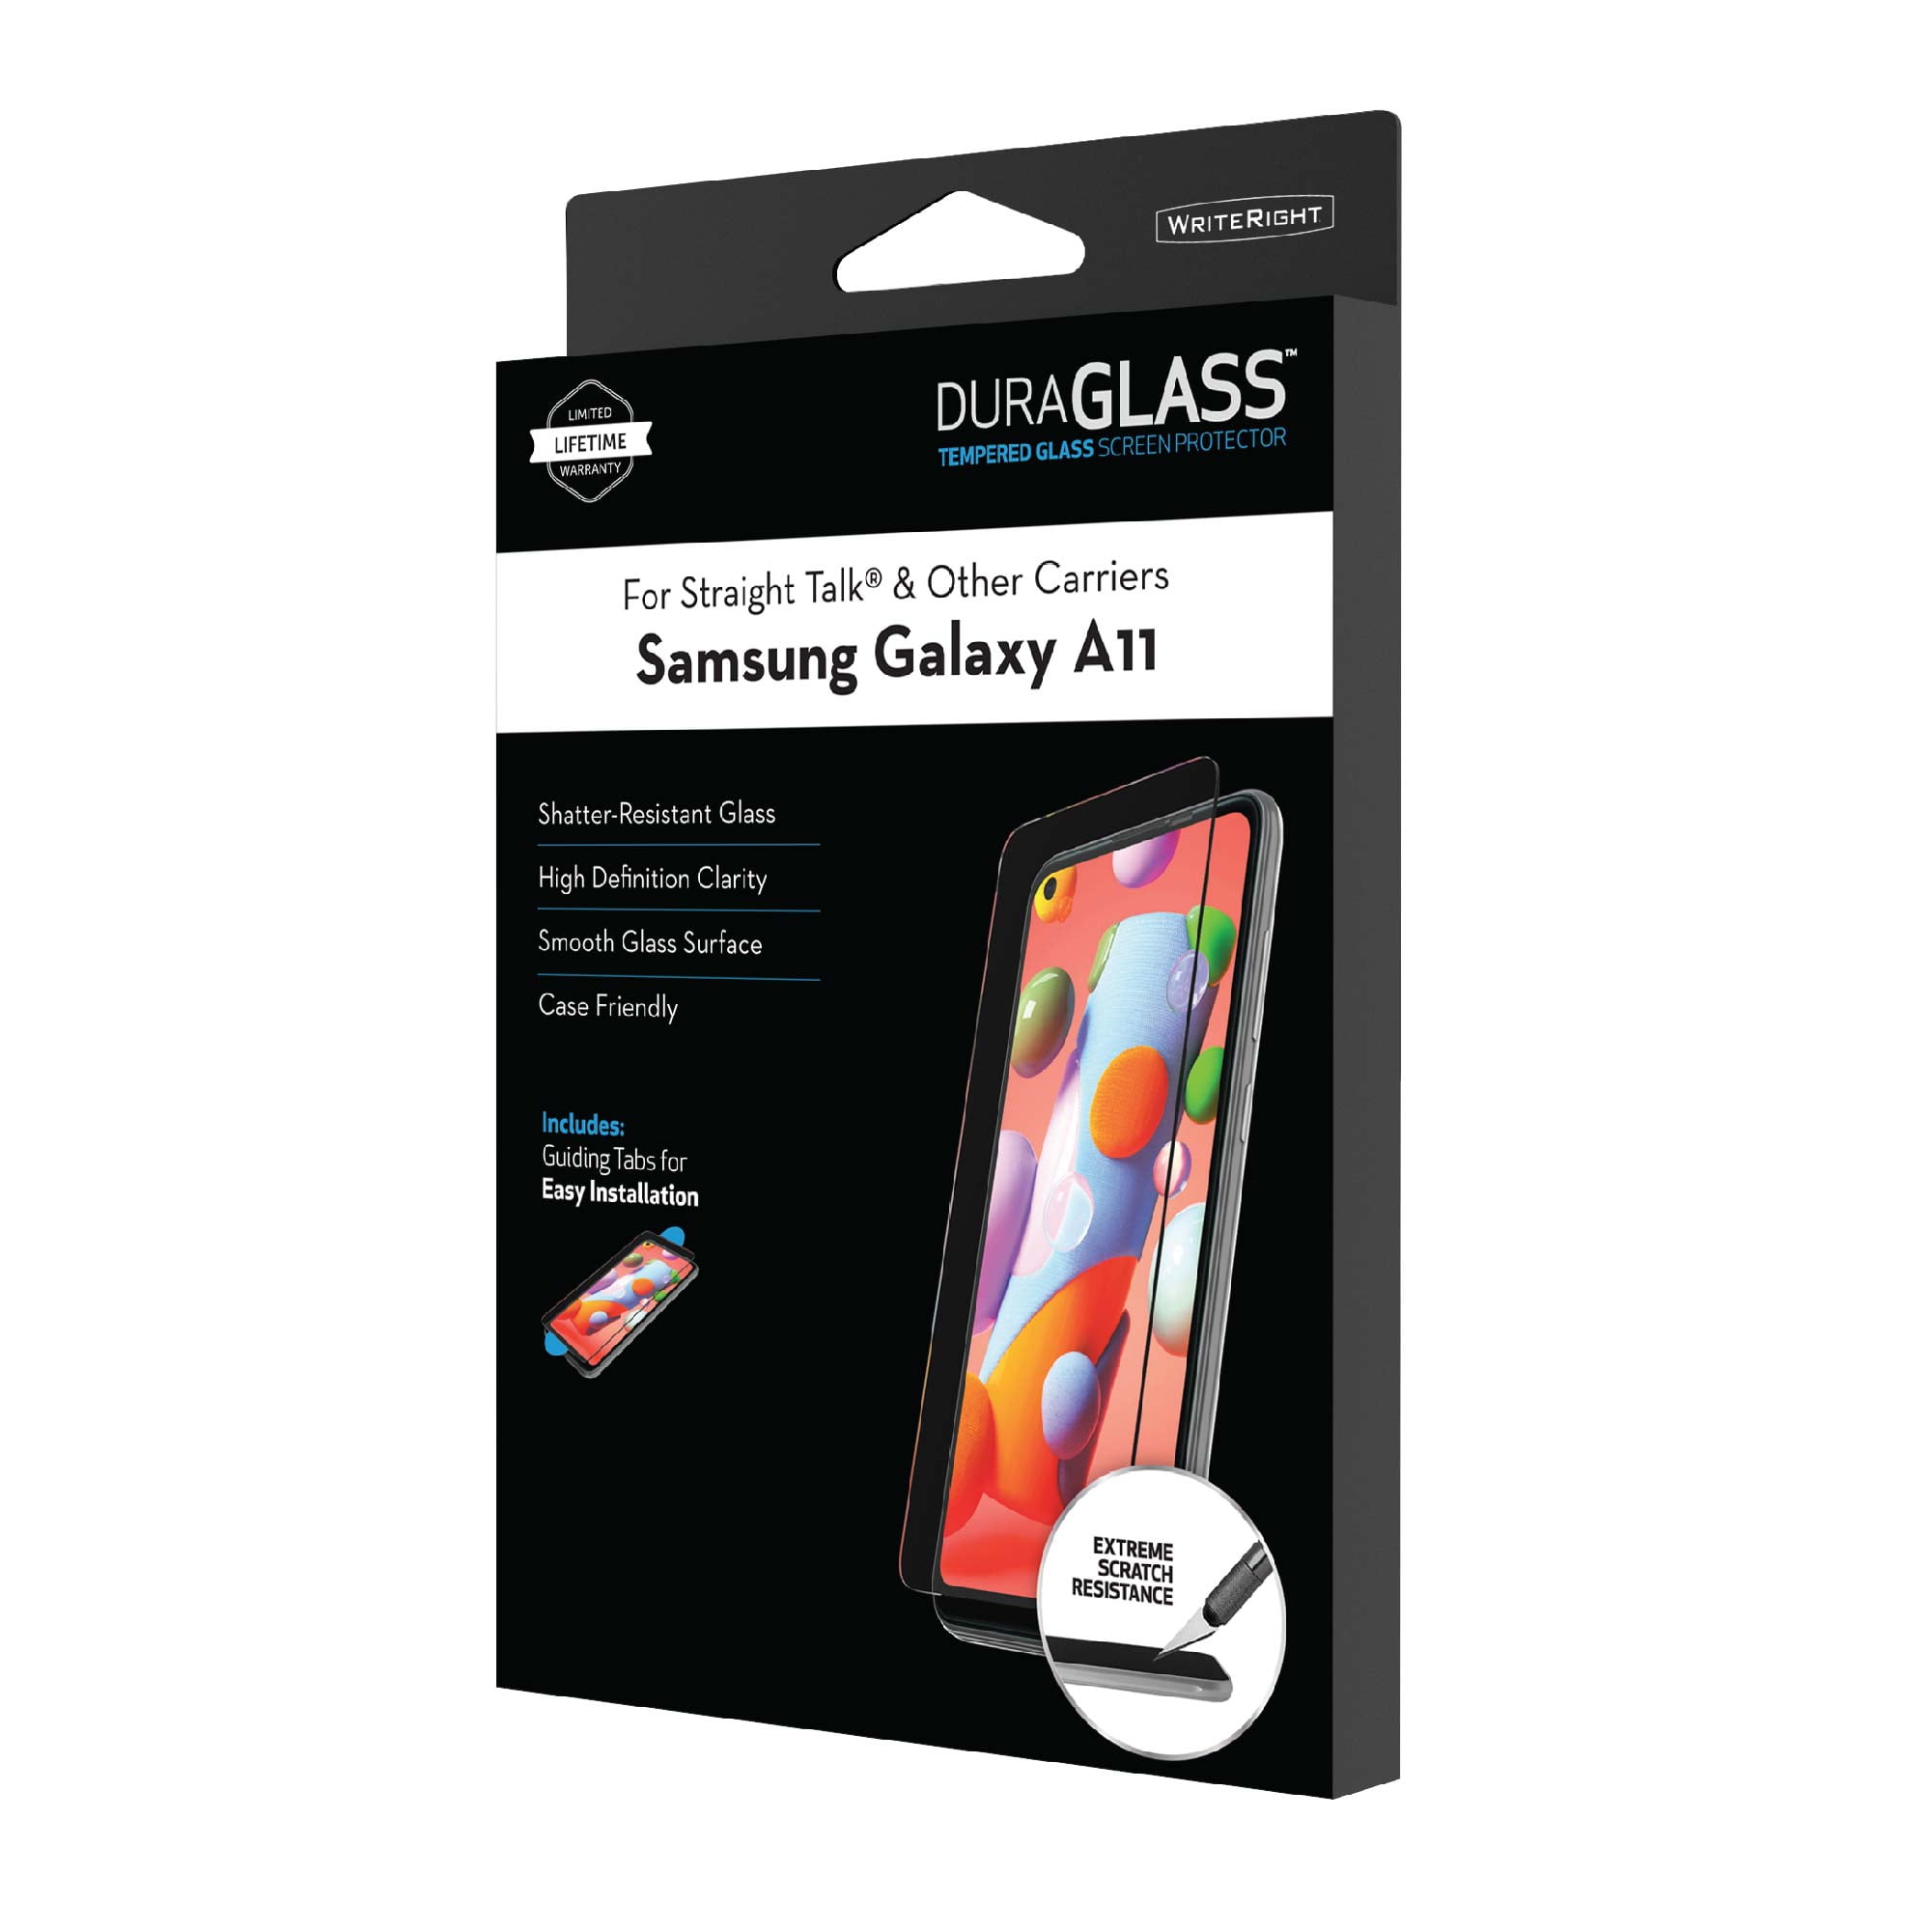 DuraGlass Tempered Glass Screen Protector for SAMSUNG Galaxy A11